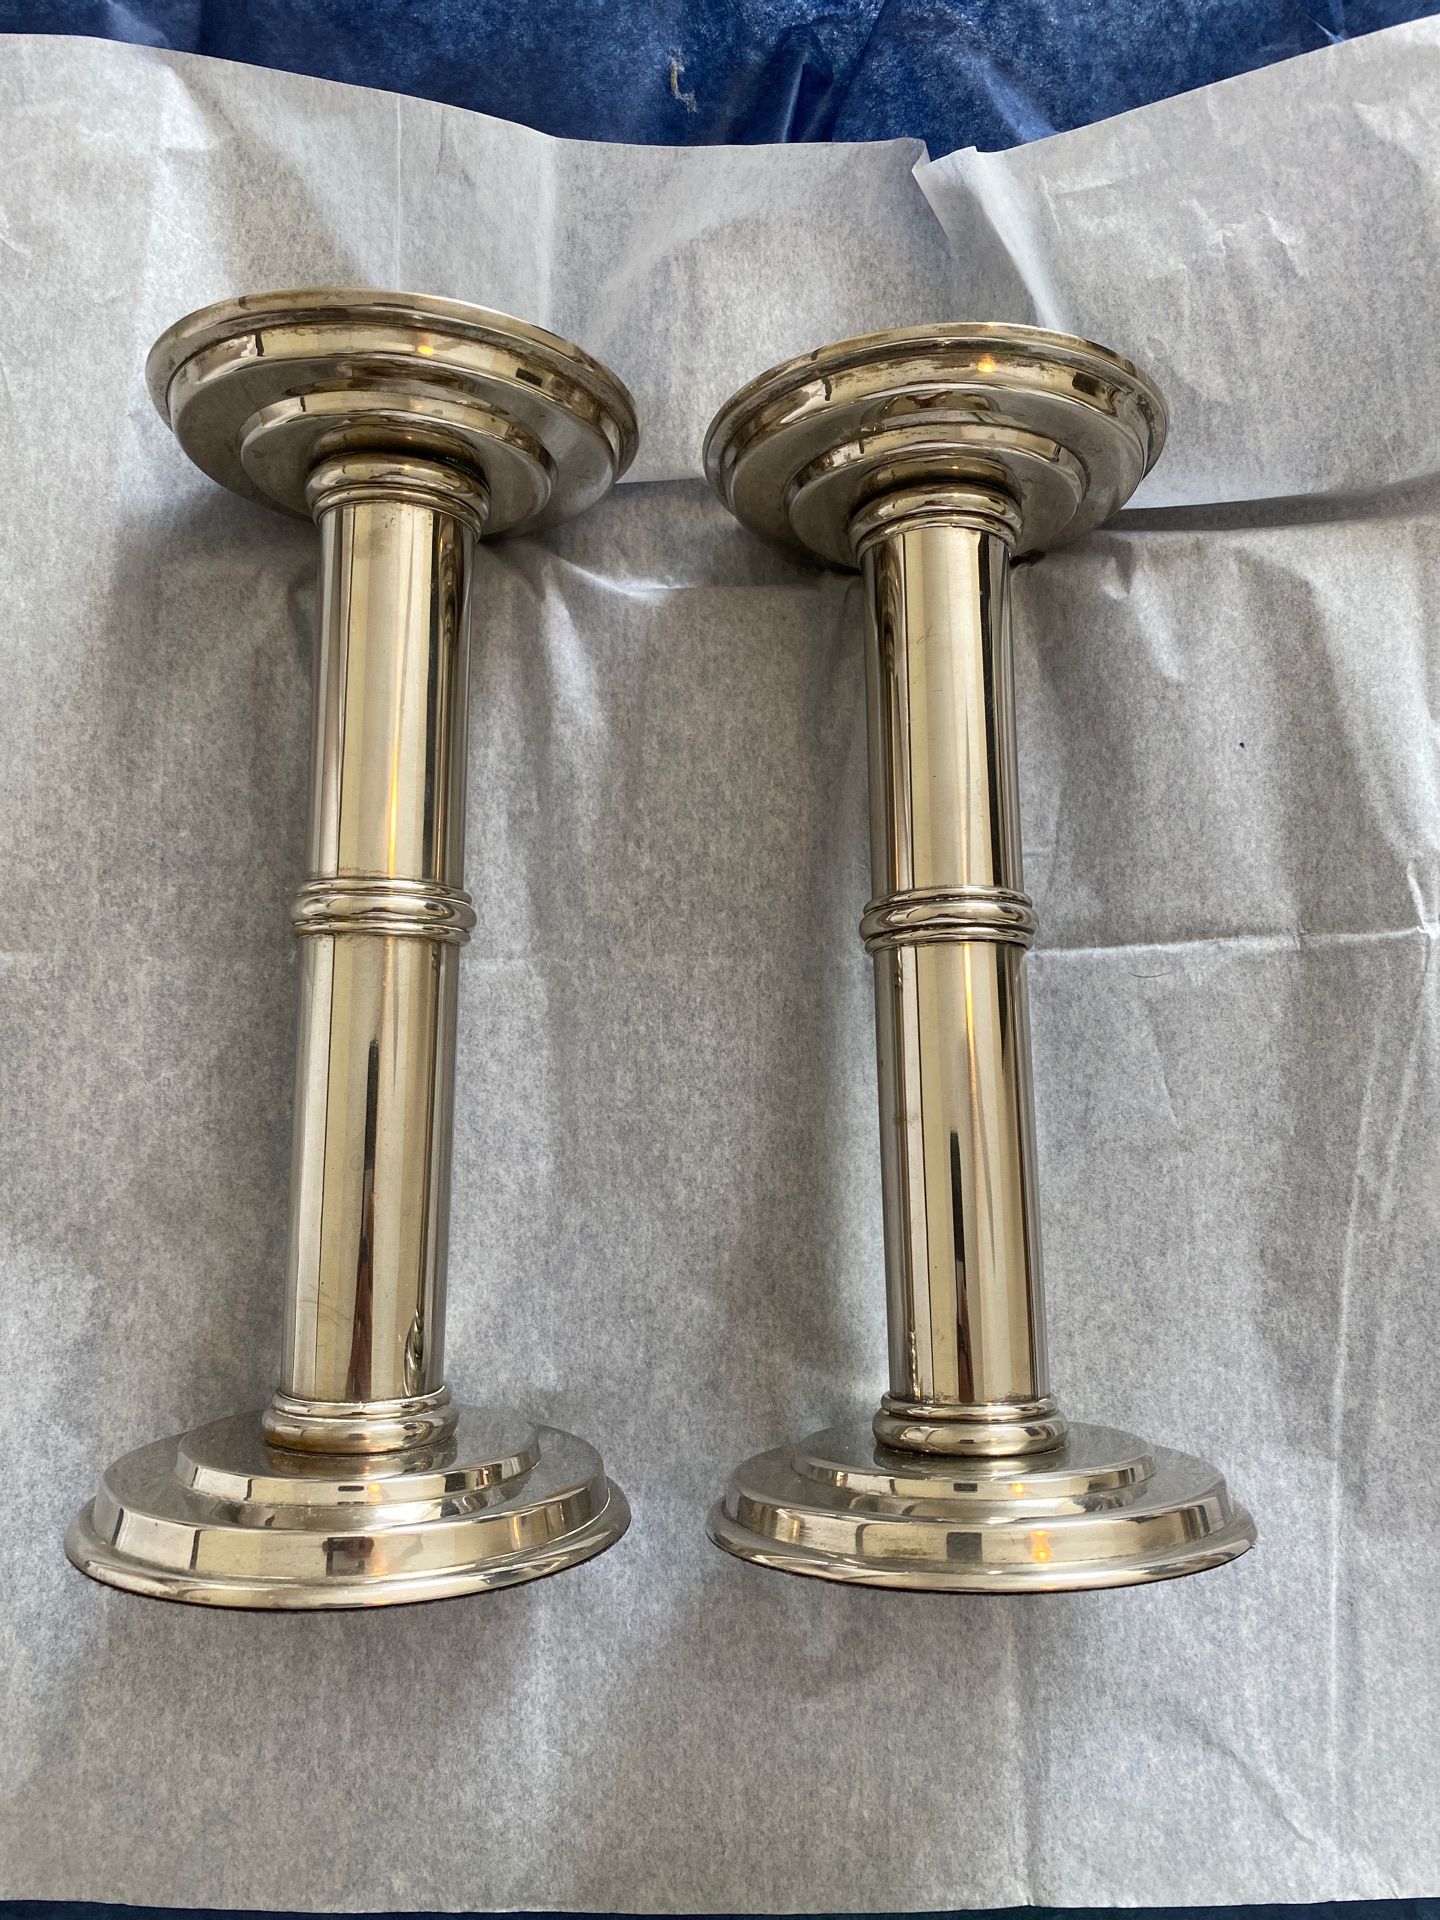 Candelabras silver plated